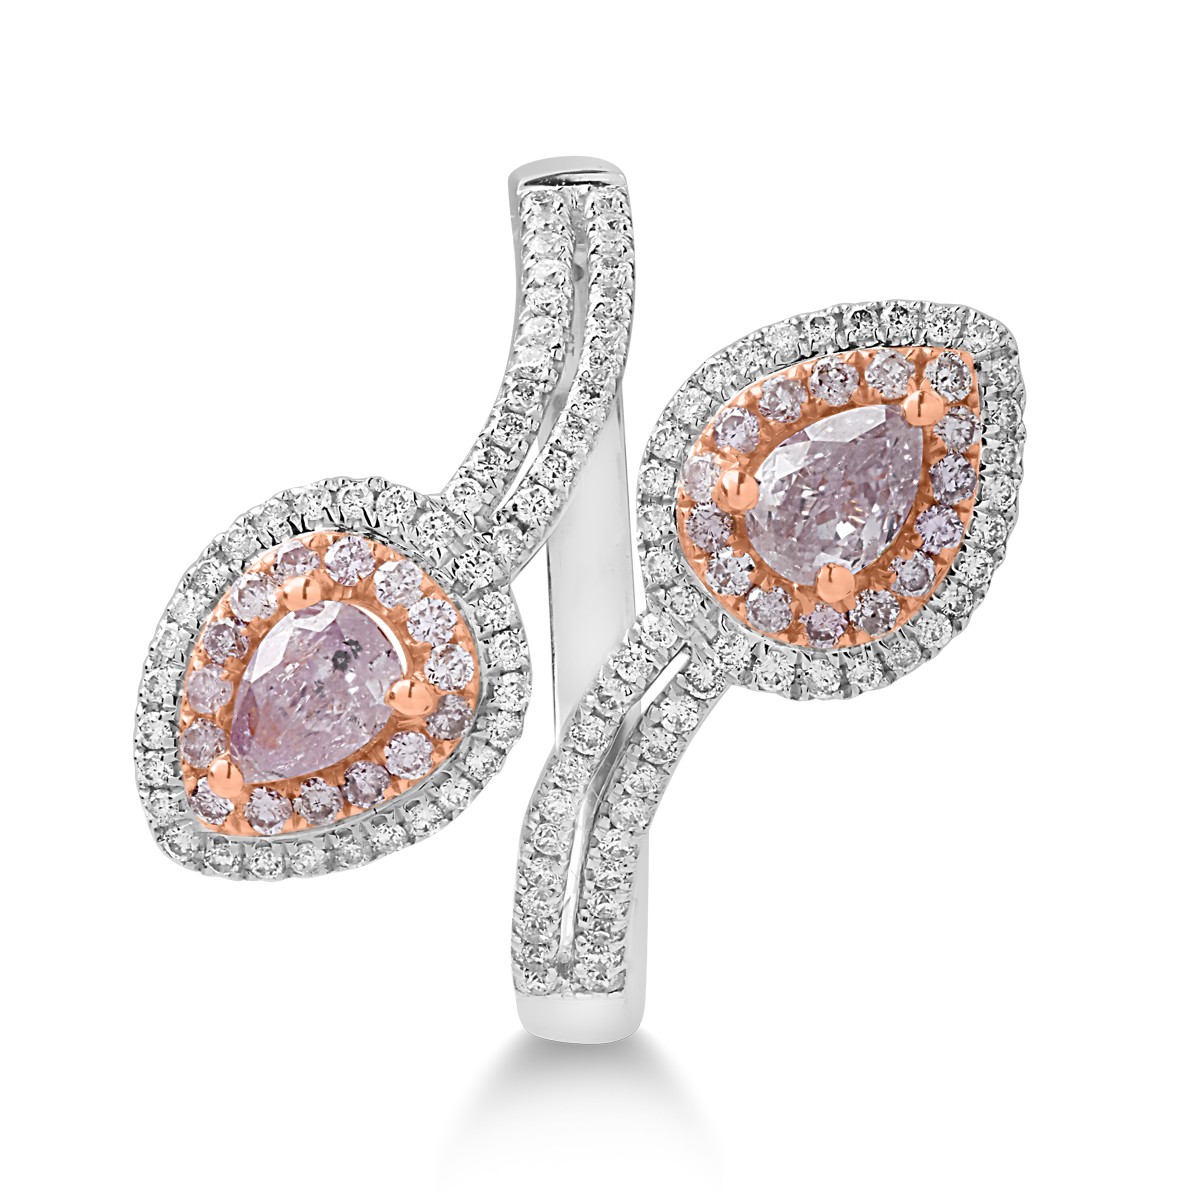 18K white-rose gold ring with 0.55ct pink diamonds and 0.35ct clear diamonds